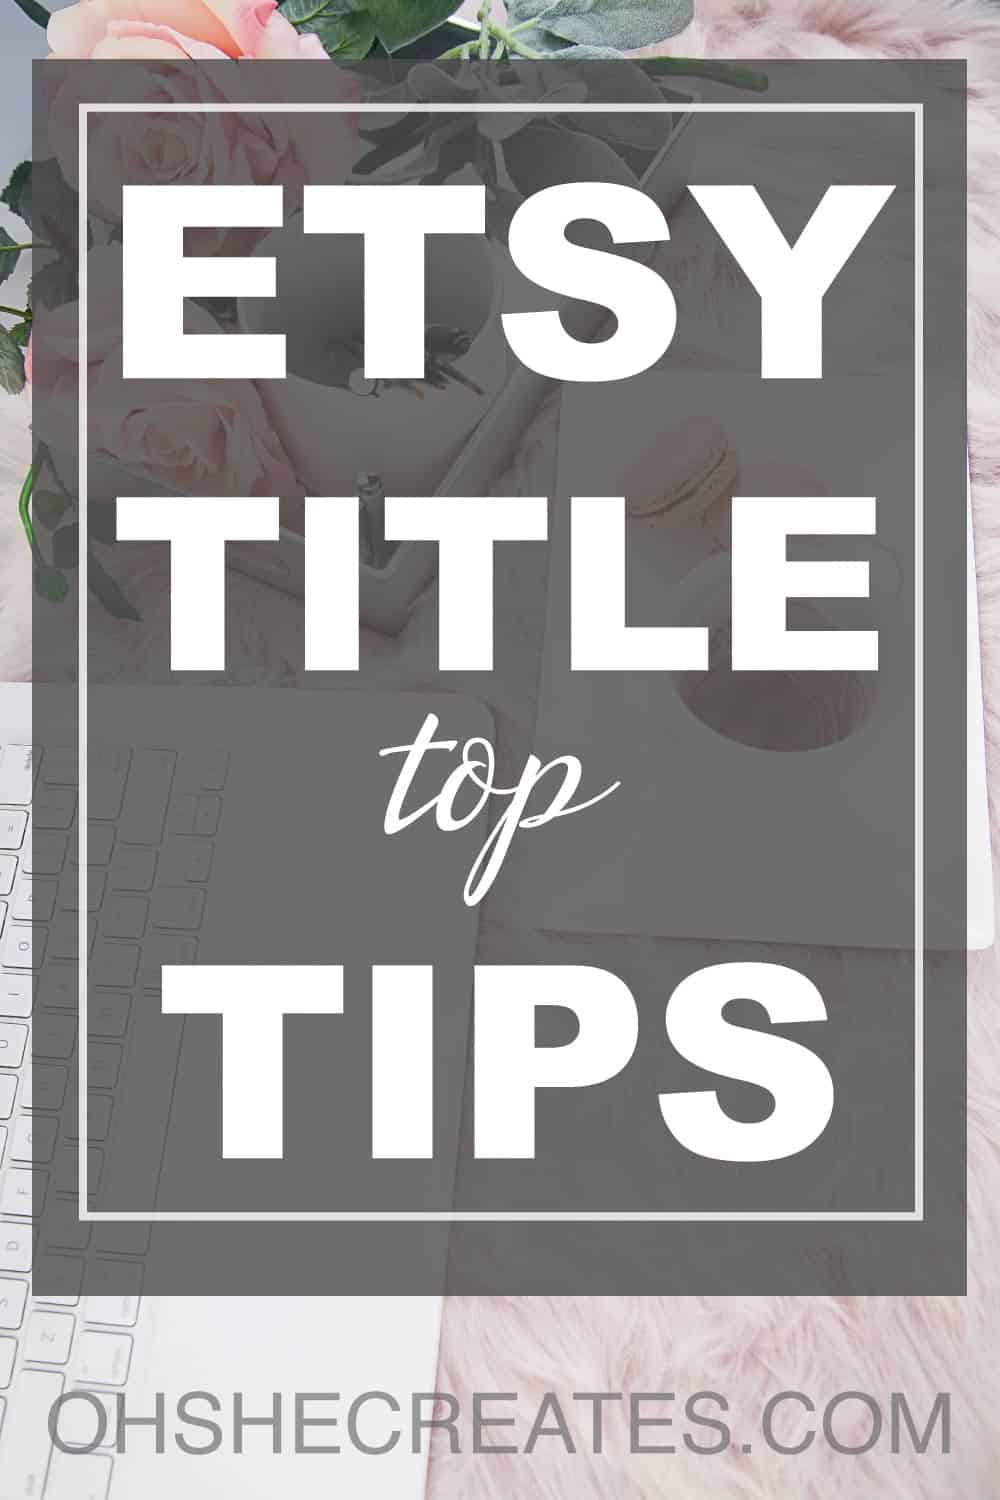 Etsy title top tips text with overlay